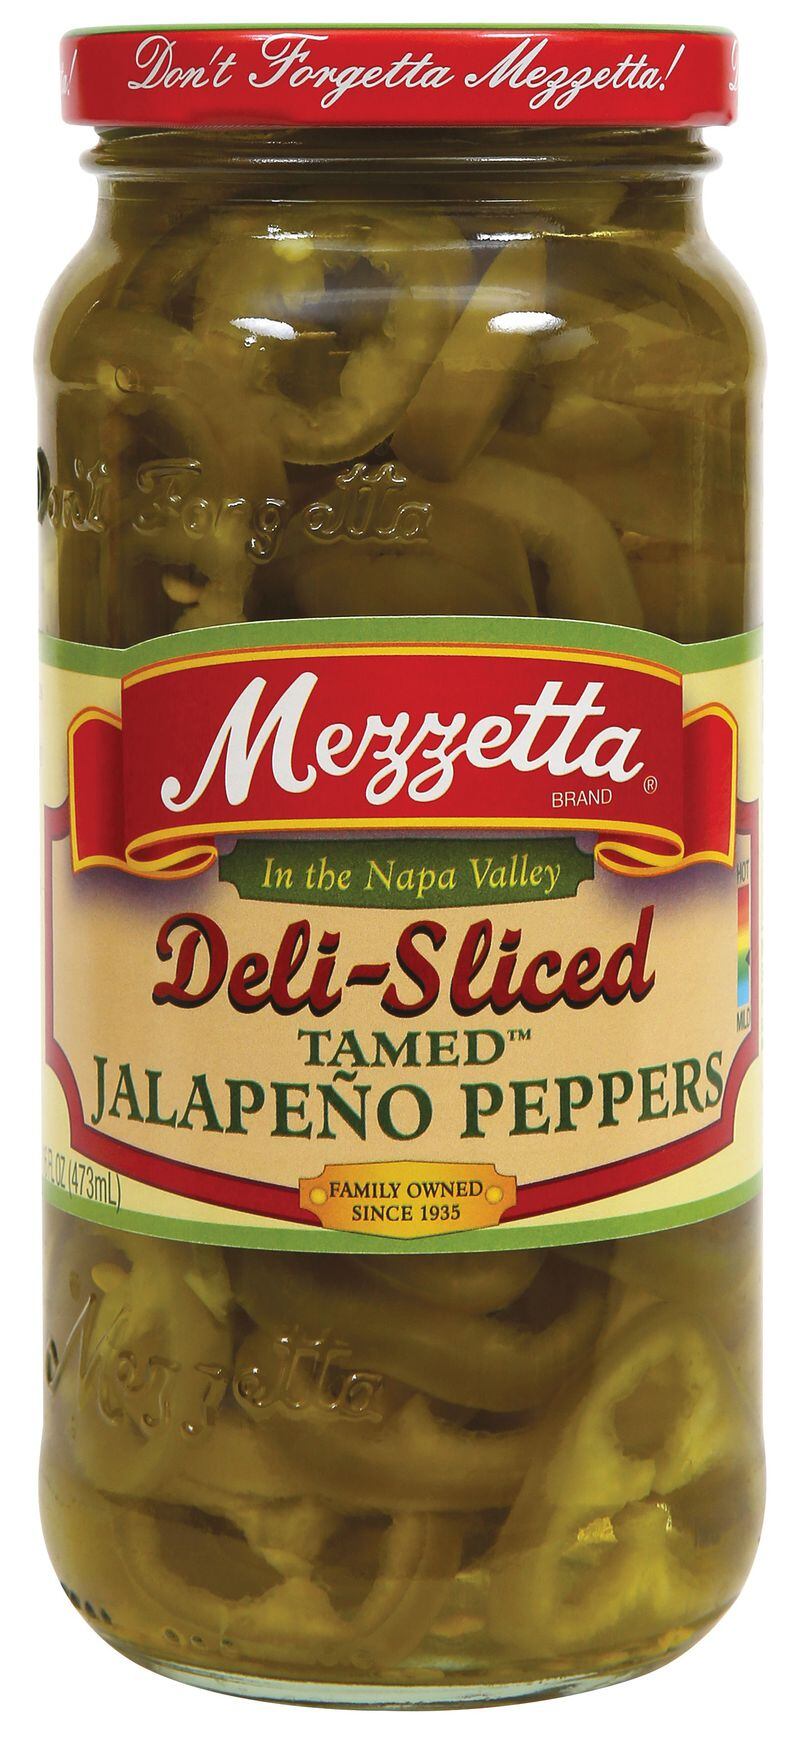  Tamed Jalapeno Peppers from Mezzetta